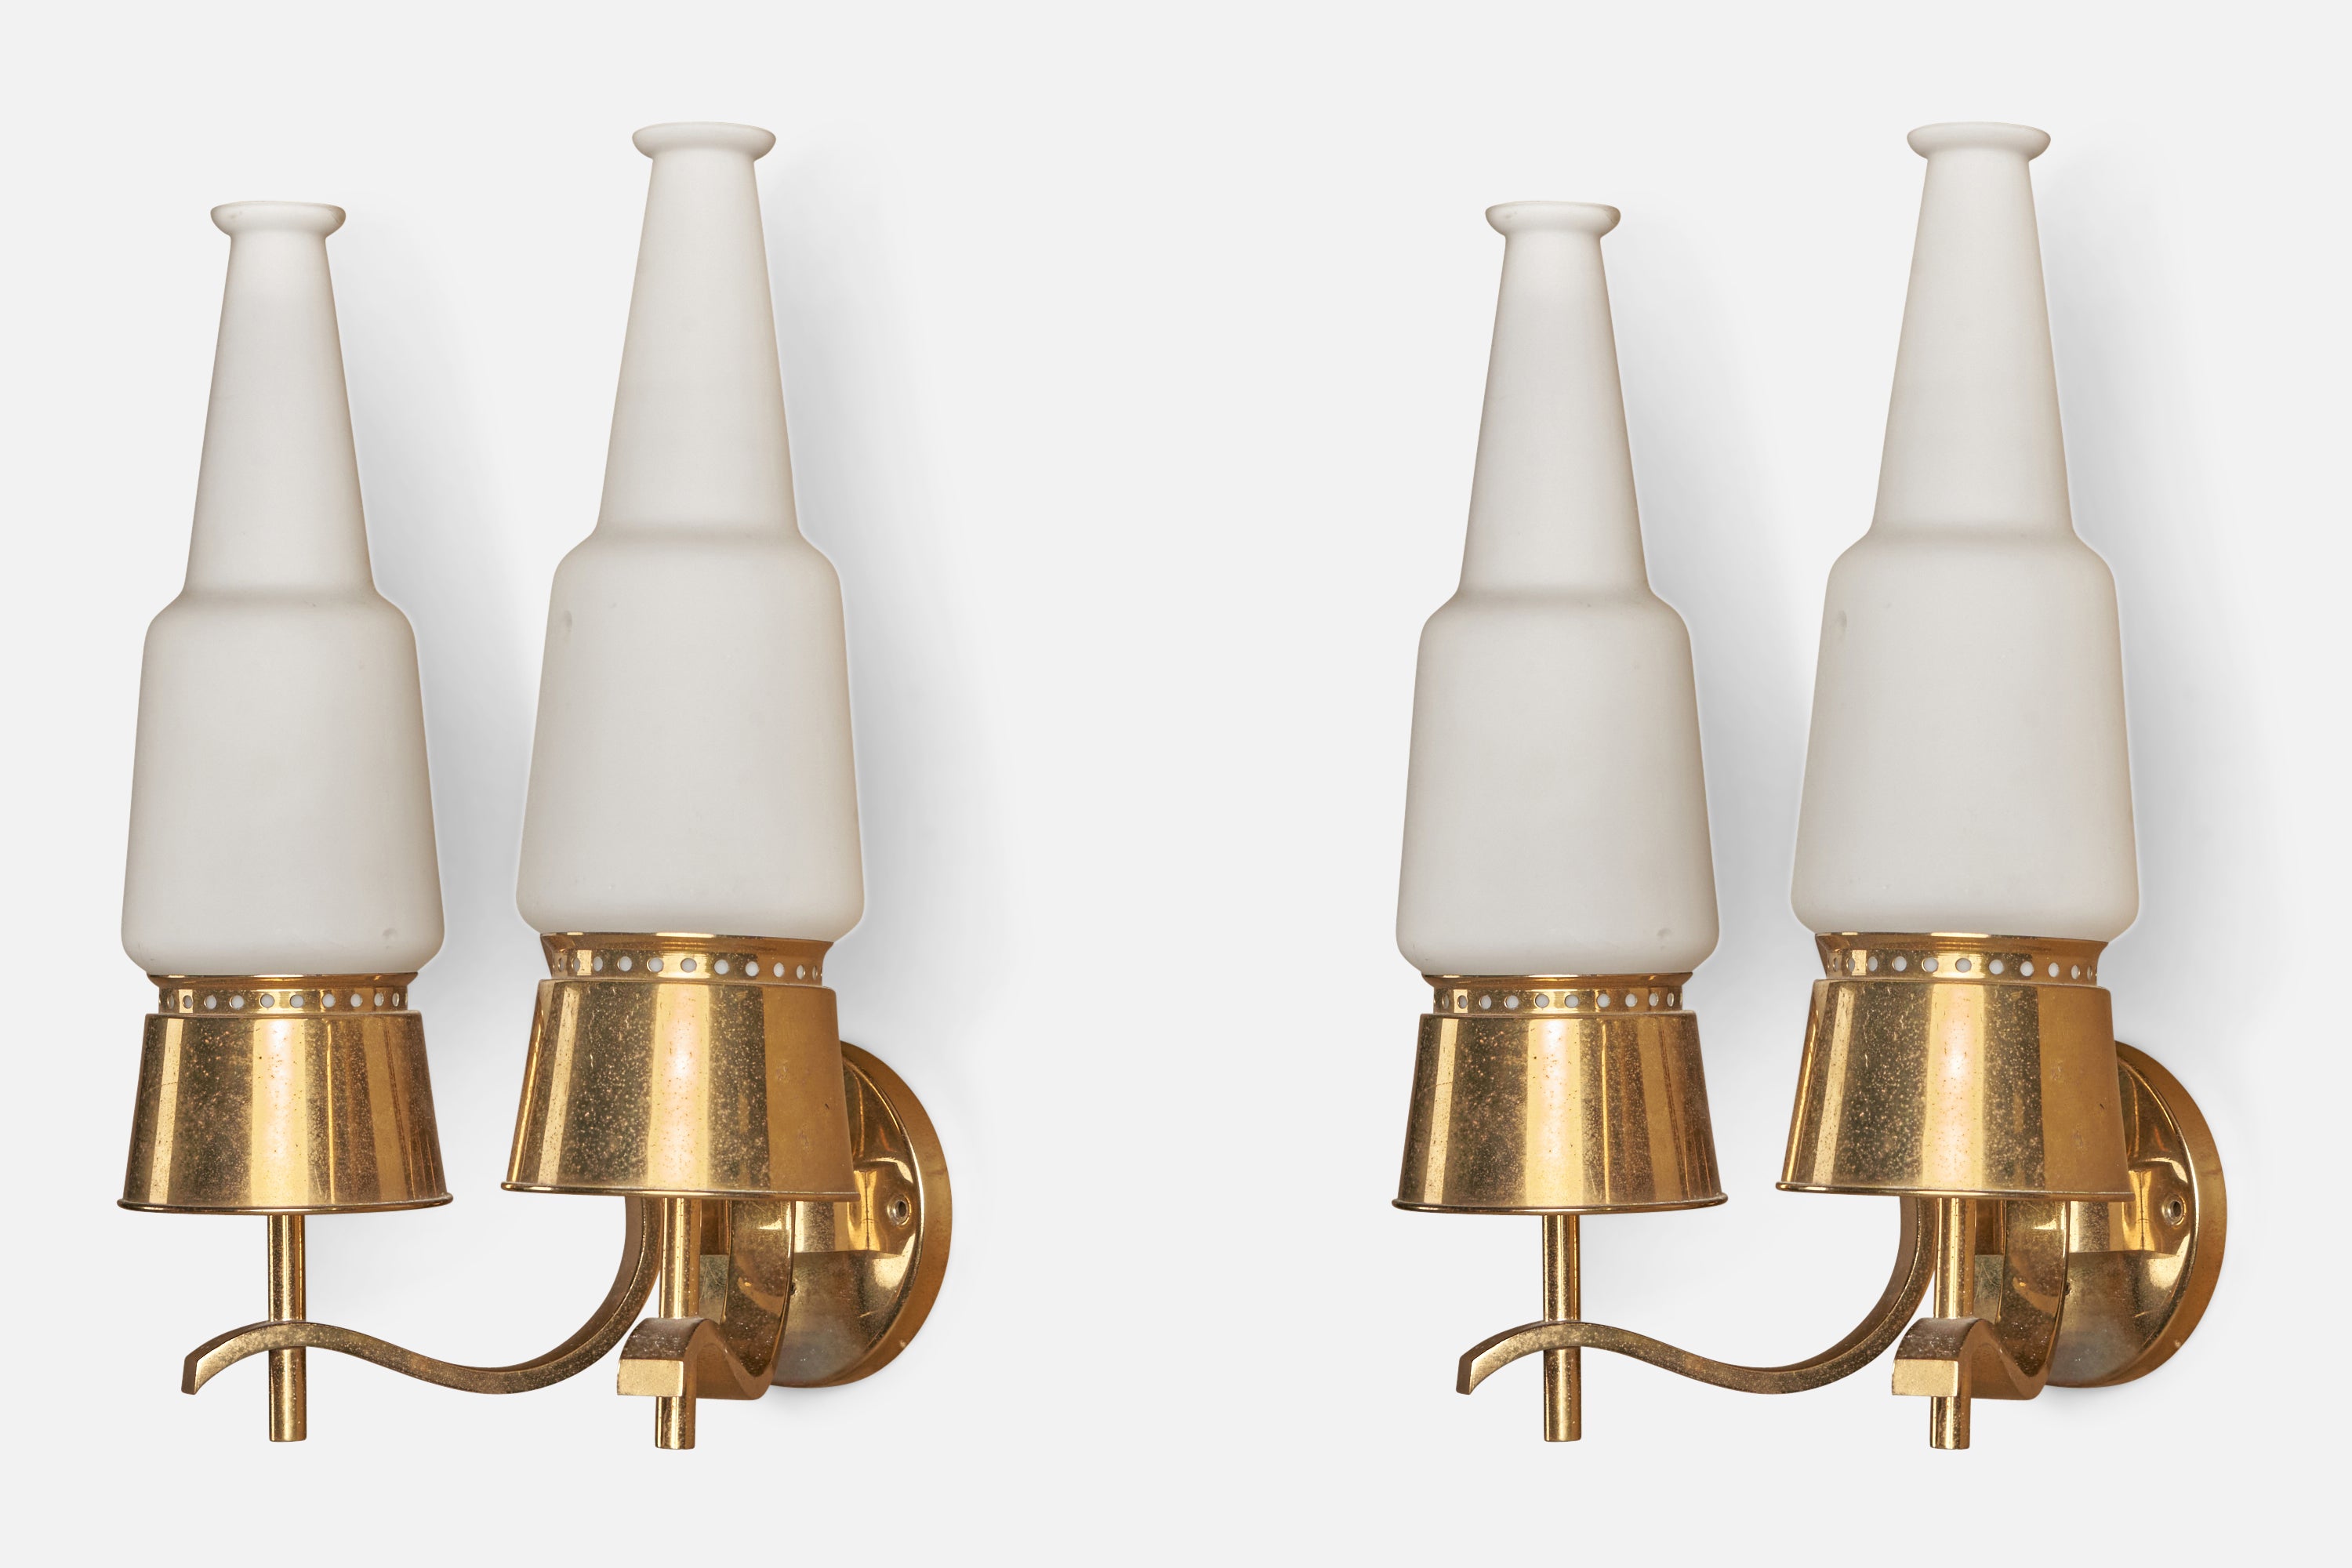 A pair of two armed brass and glass wall lights designed by Angelo Lelii and produced by Arredoluce, Monza, Italy, 1950s.

Overall Dimensions: 15.5